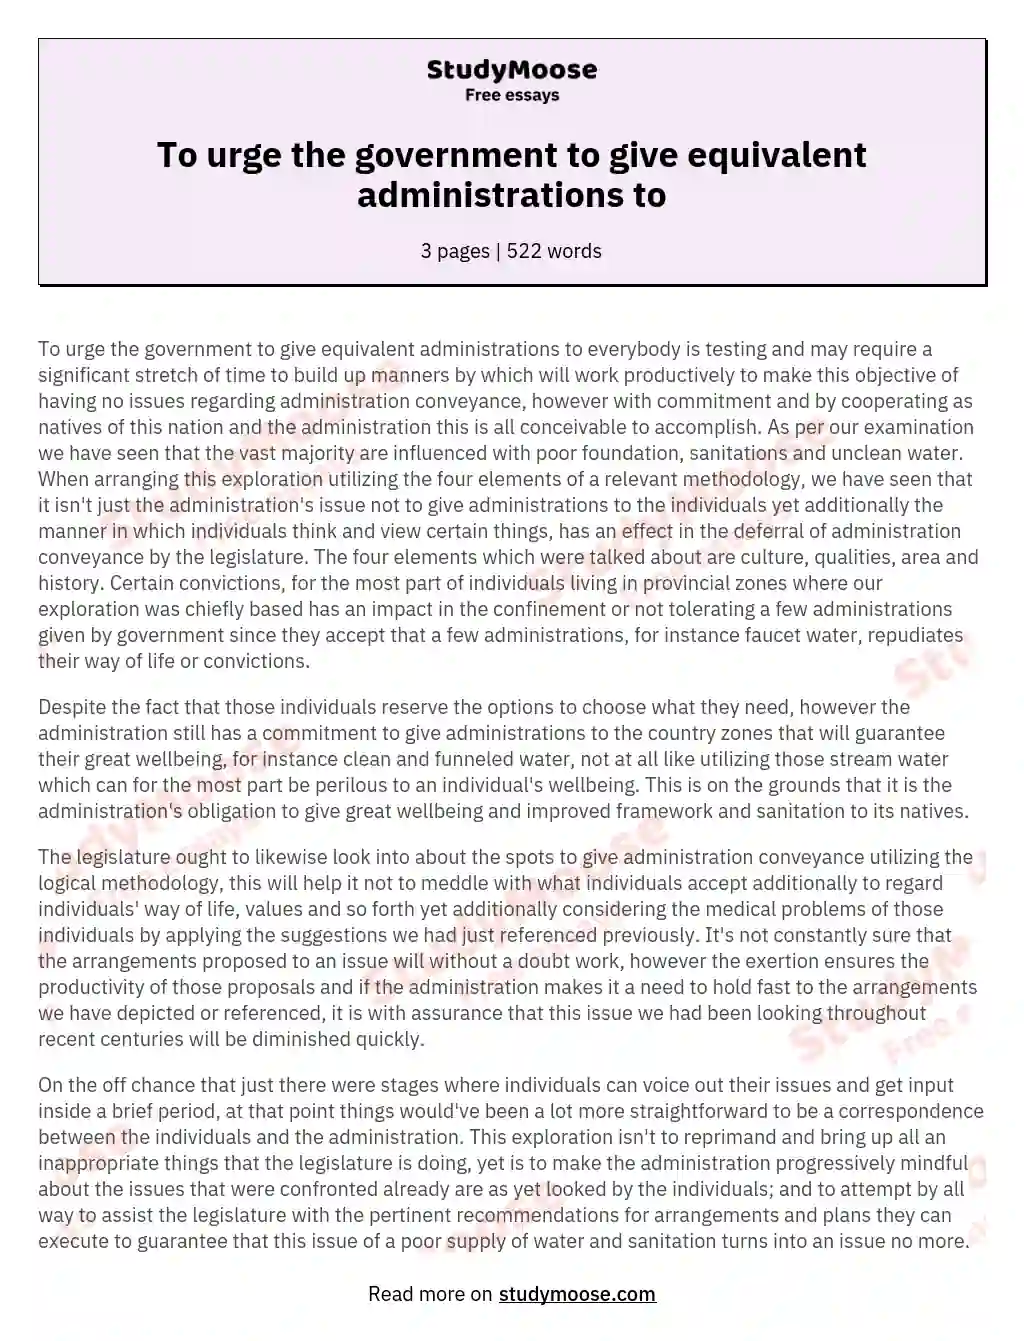 To urge the government to give equivalent administrations to essay